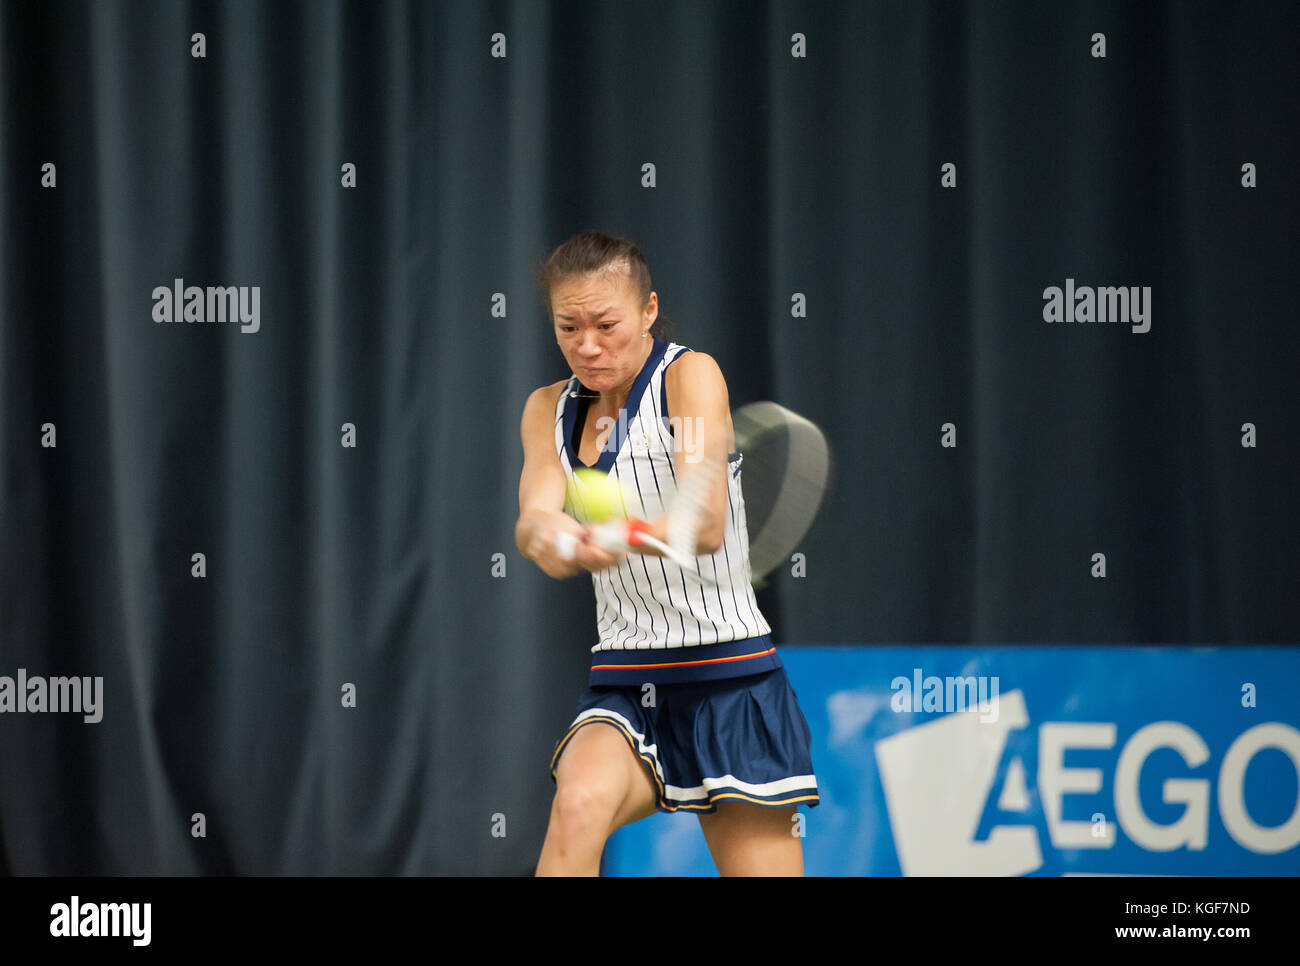 Shrewsbury, Shropshire. 7th Nov, 2017. Shilin XU from Guangdong, China lost her 1st round match, from the Aegon GB Pro-Series $25K Women's Tennis from the Shrewsbury Club, Shrewsbury, Shropshire, UK against the top seed Lesley KERKHOVE from Goes, Netherlands 7-5, 6-4 Credit: RICHARD DAWSON/Alamy Live News Stock Photo